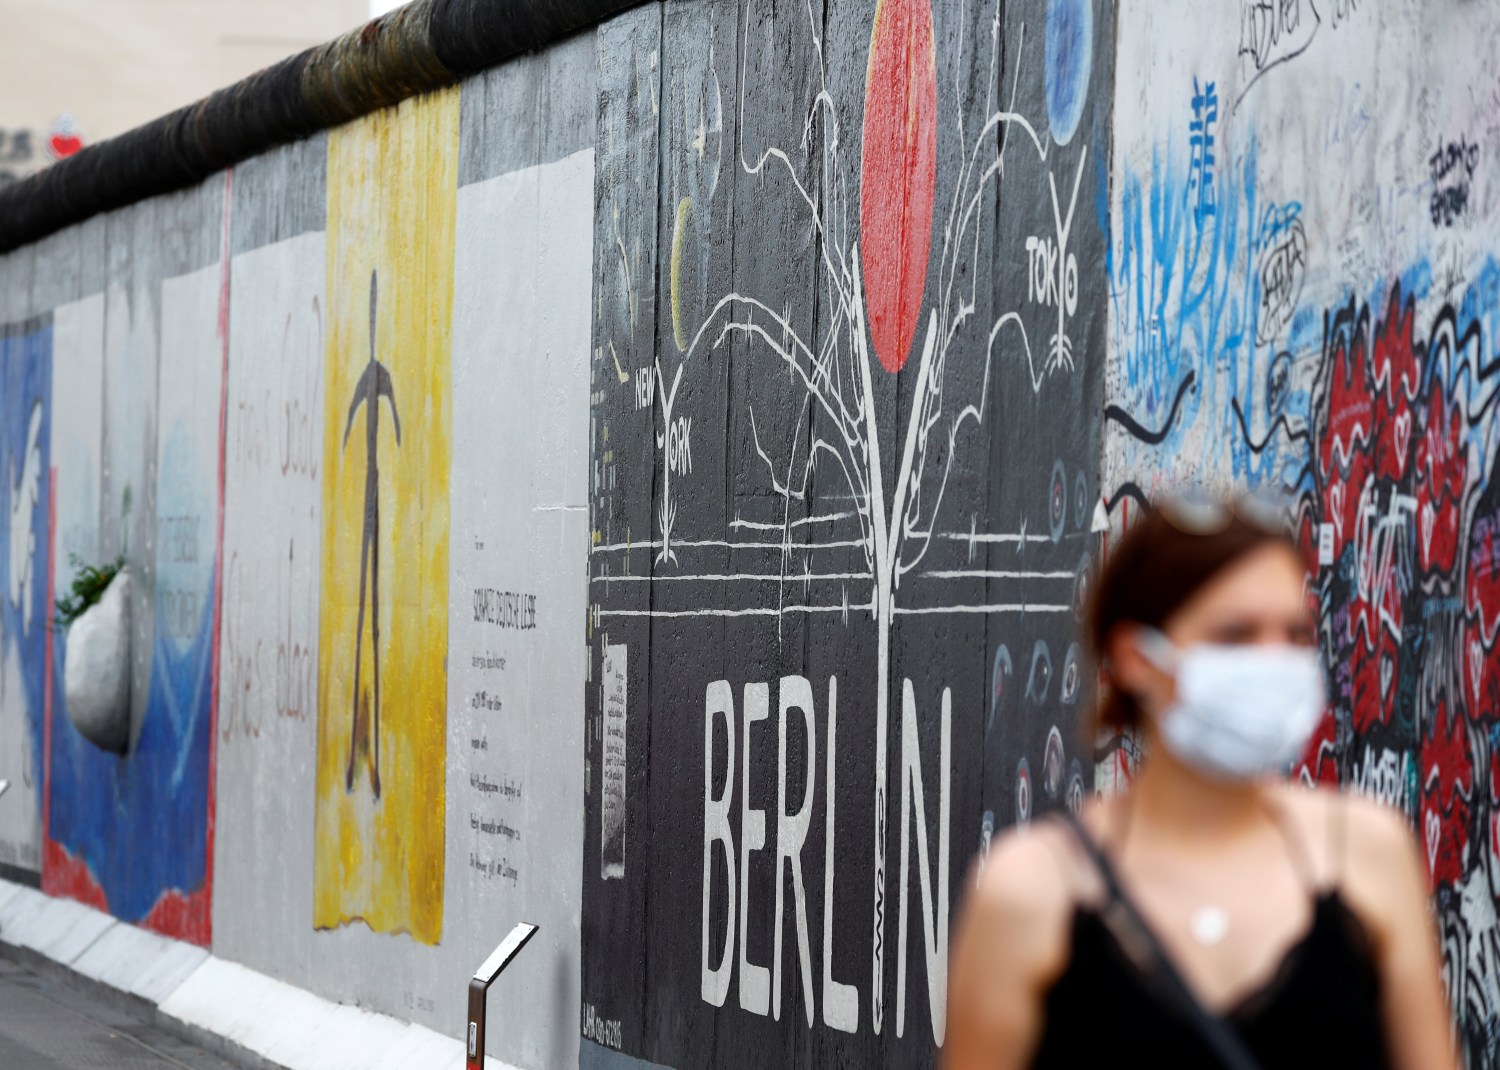 Tourist Ann-Kathrin from Germany wears a face mask as she walks past the East Side Gallery, the largest remaining part of the former Berlin Wall, following the coronavirus (COVID-19) disease outbreak in Berlin, Germany, June 27, 2020.    REUTERS/Fabrizio Bensch